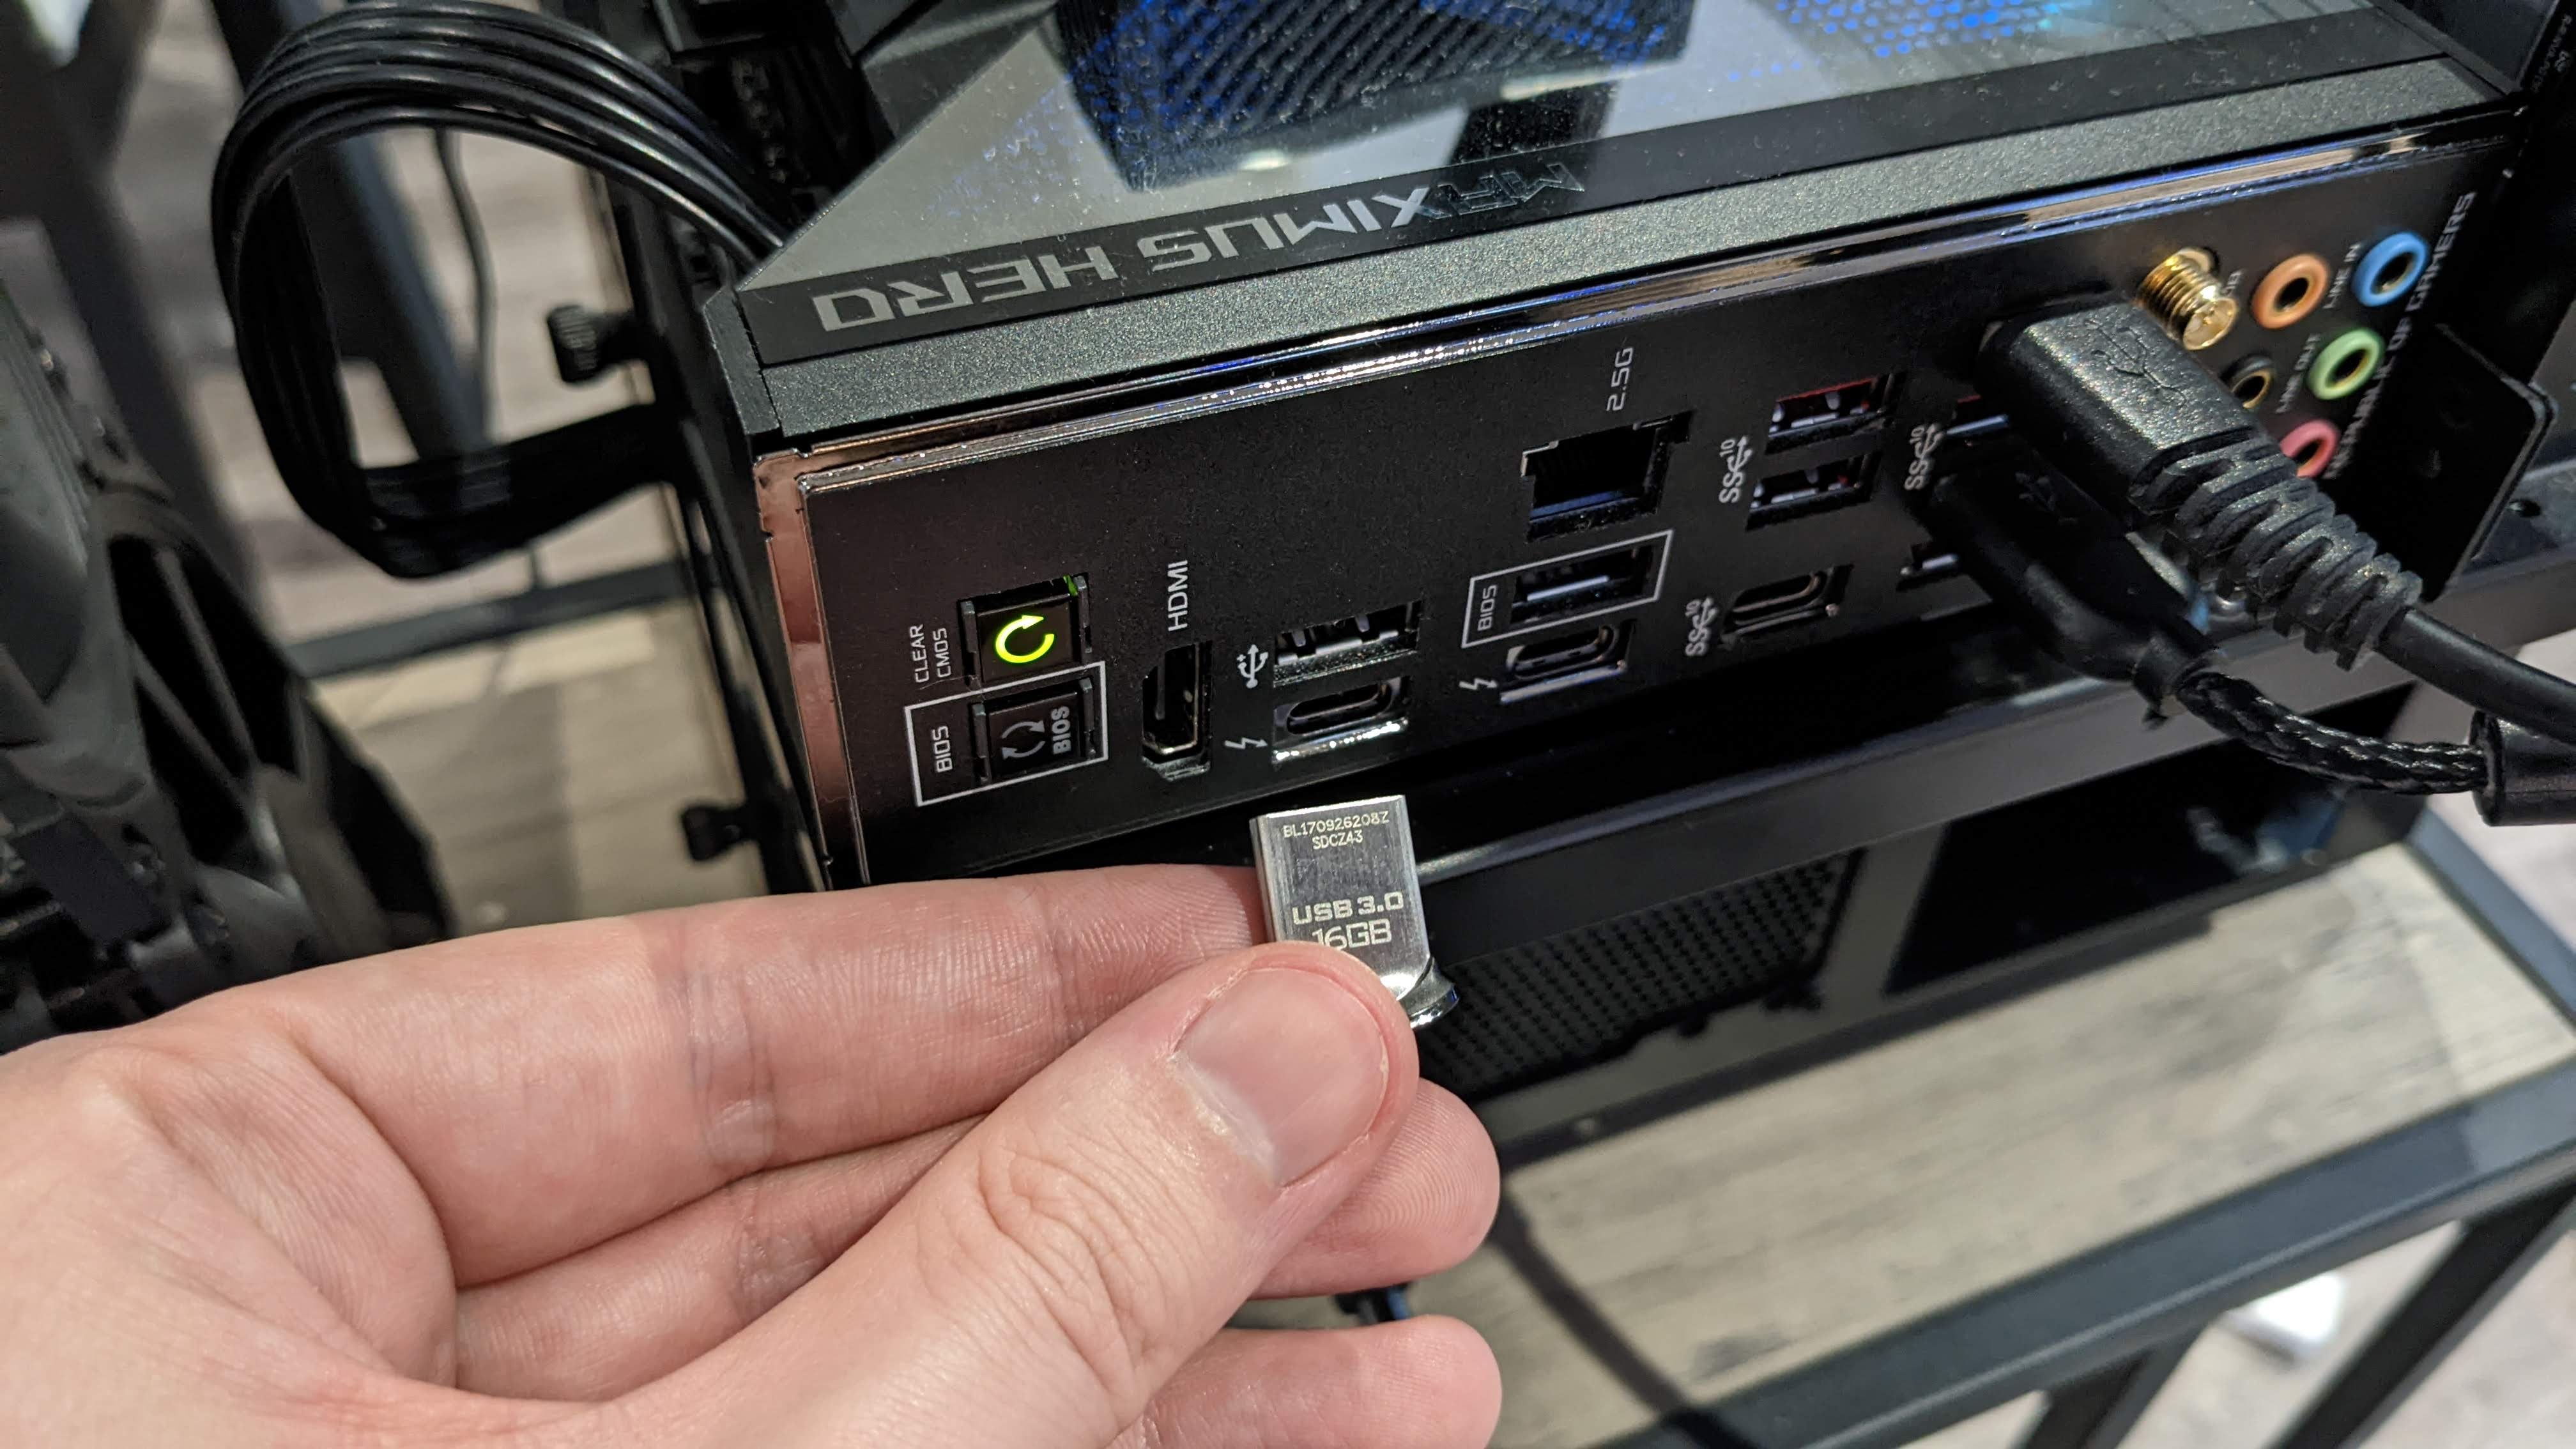 A small USB drive being inserted into a spare slot on a motherboard's rear I/O panel.